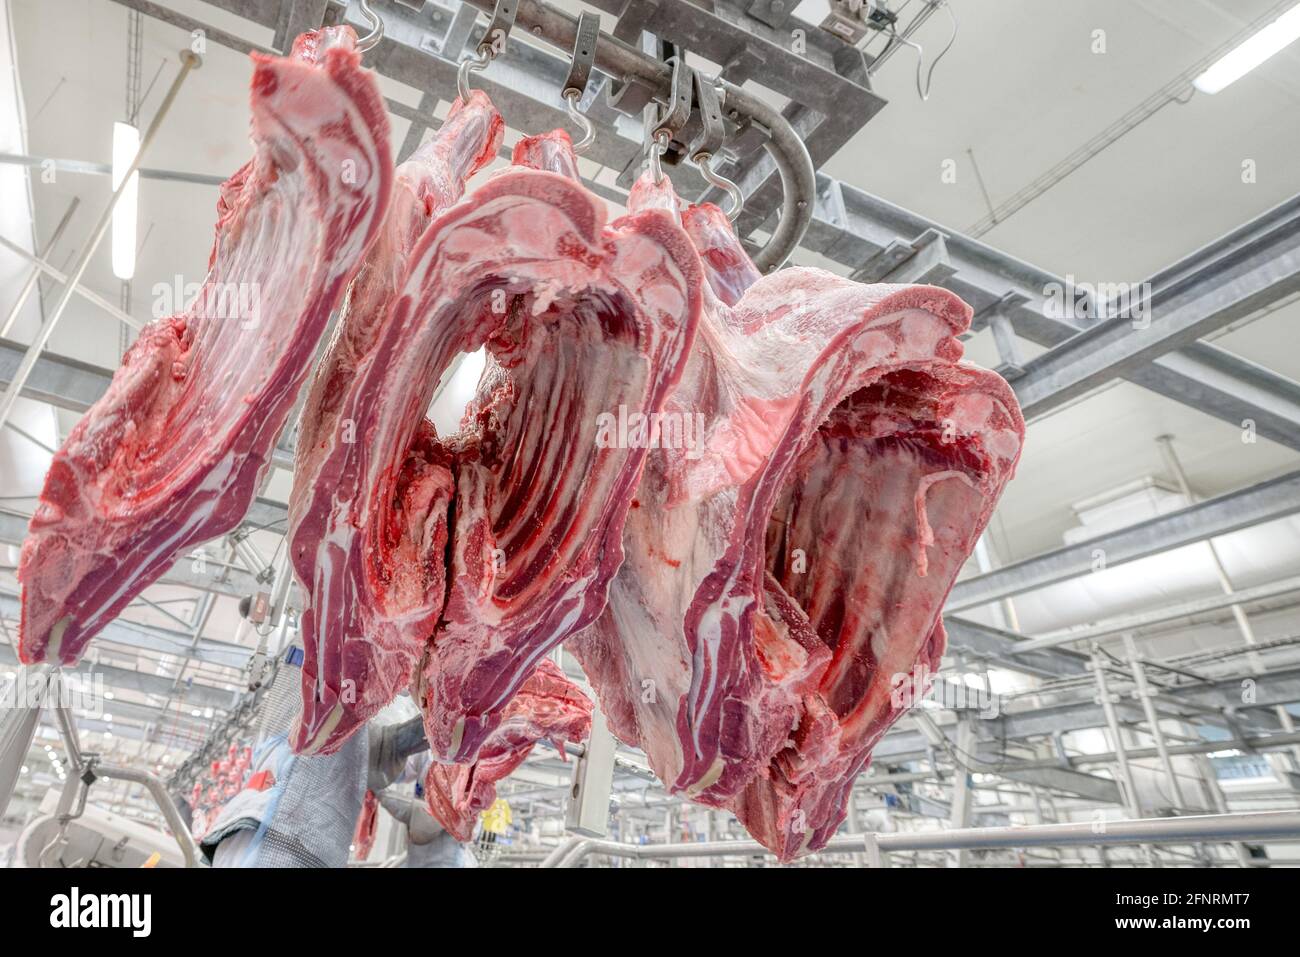 7,835 Raw Meat Freezer Images, Stock Photos, 3D objects, & Vectors